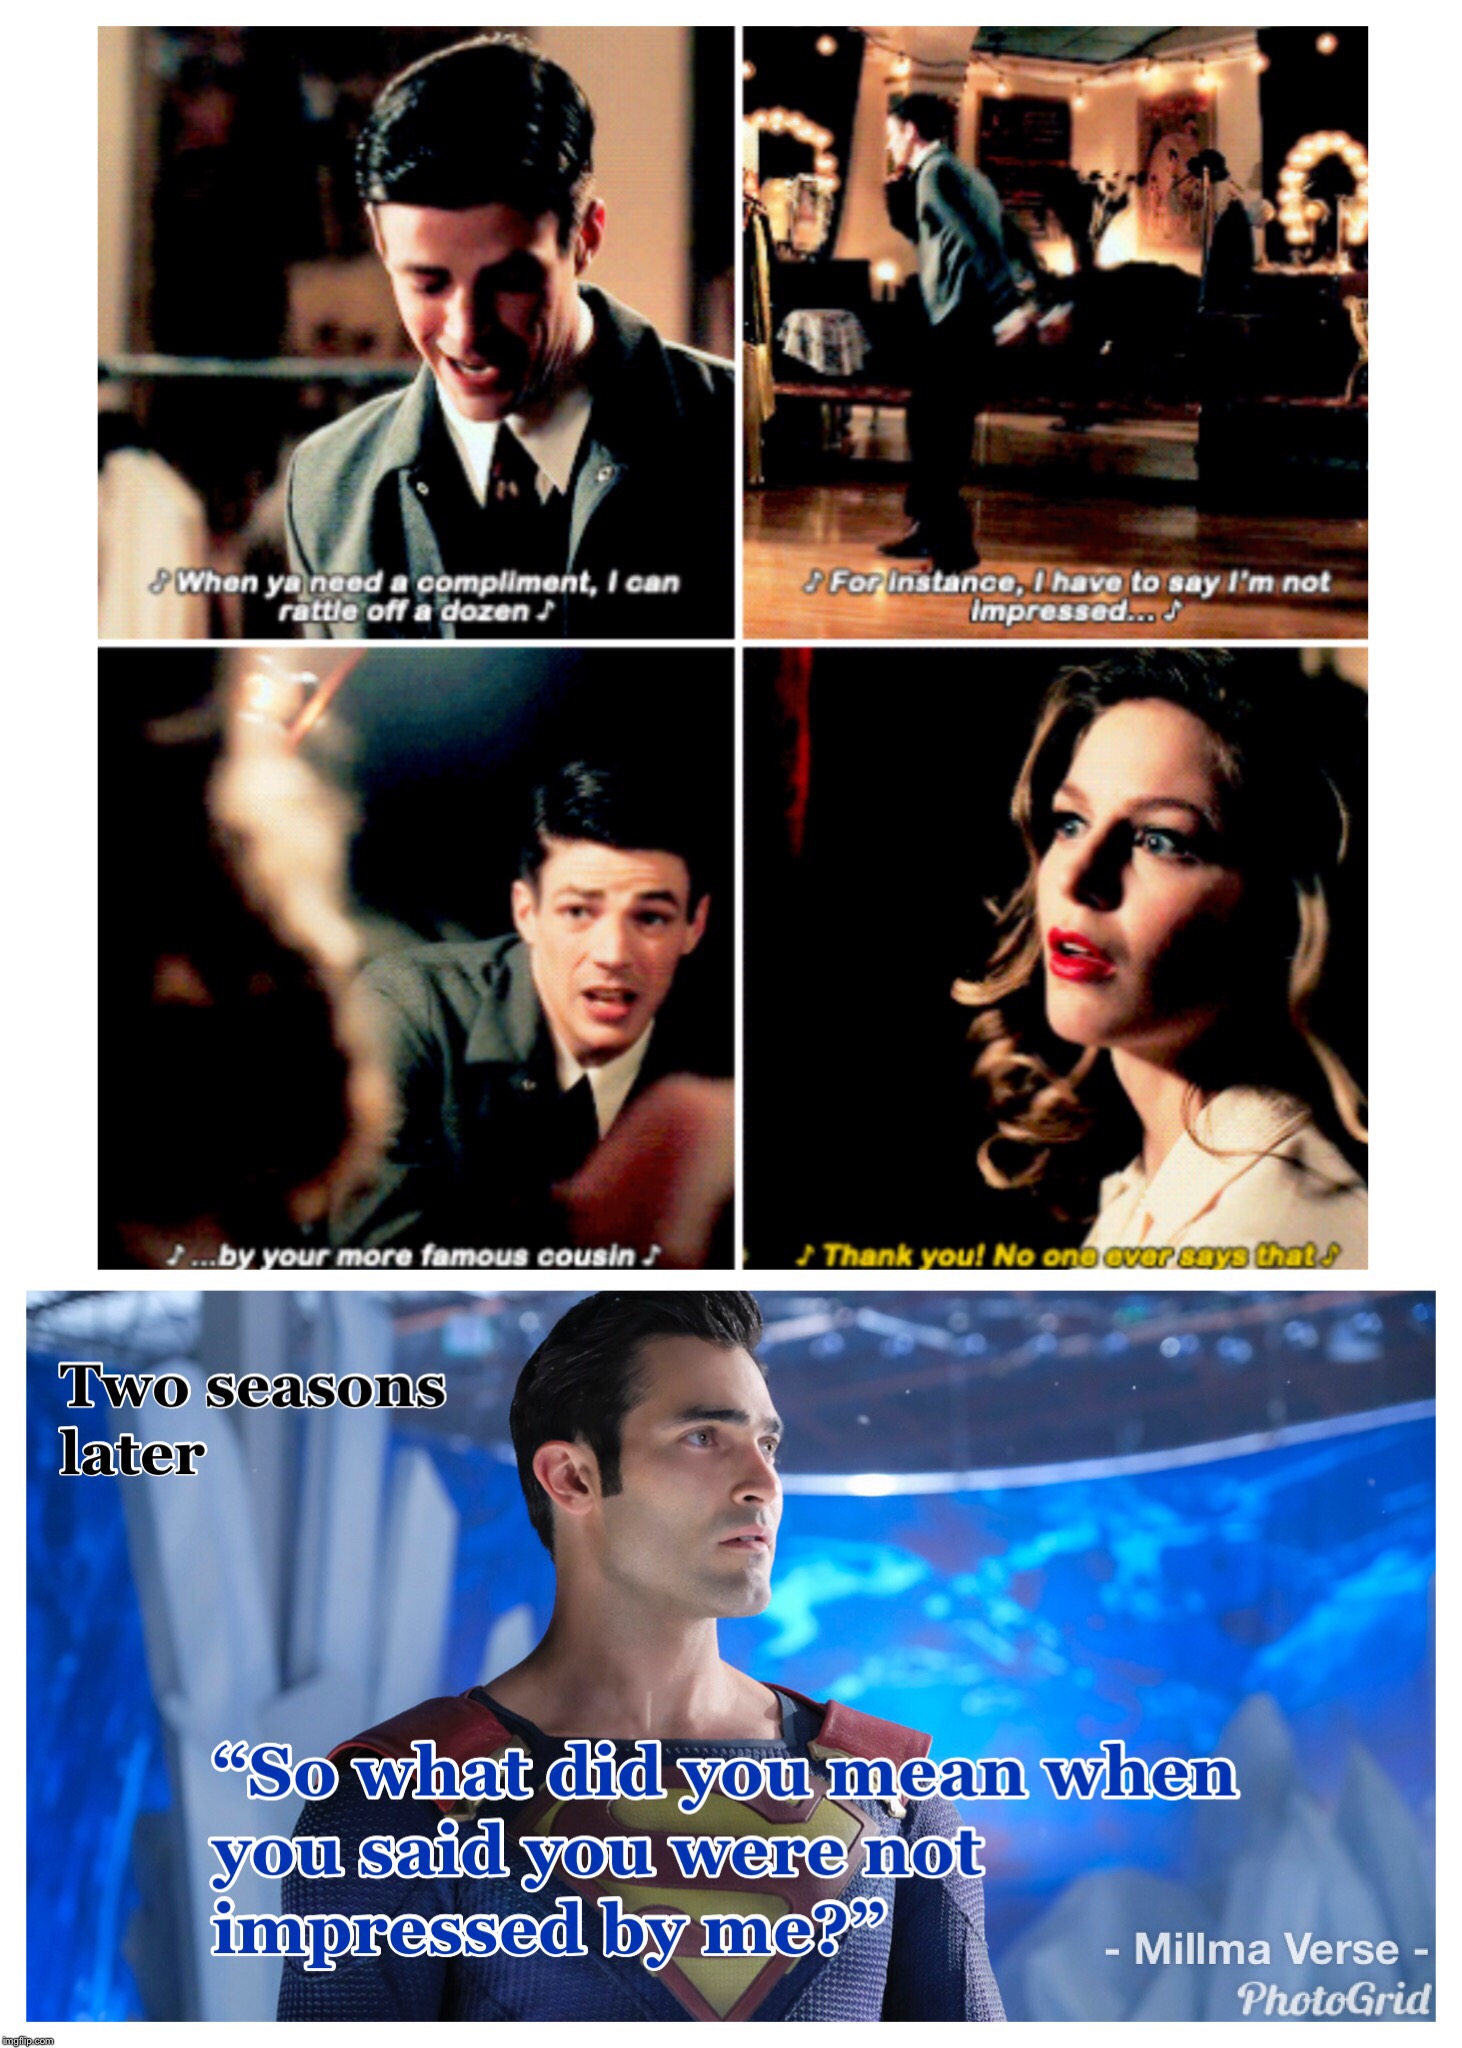 Superman Question | image tagged in the flash,superman,supergirl,arrowverse,duet | made w/ Imgflip meme maker